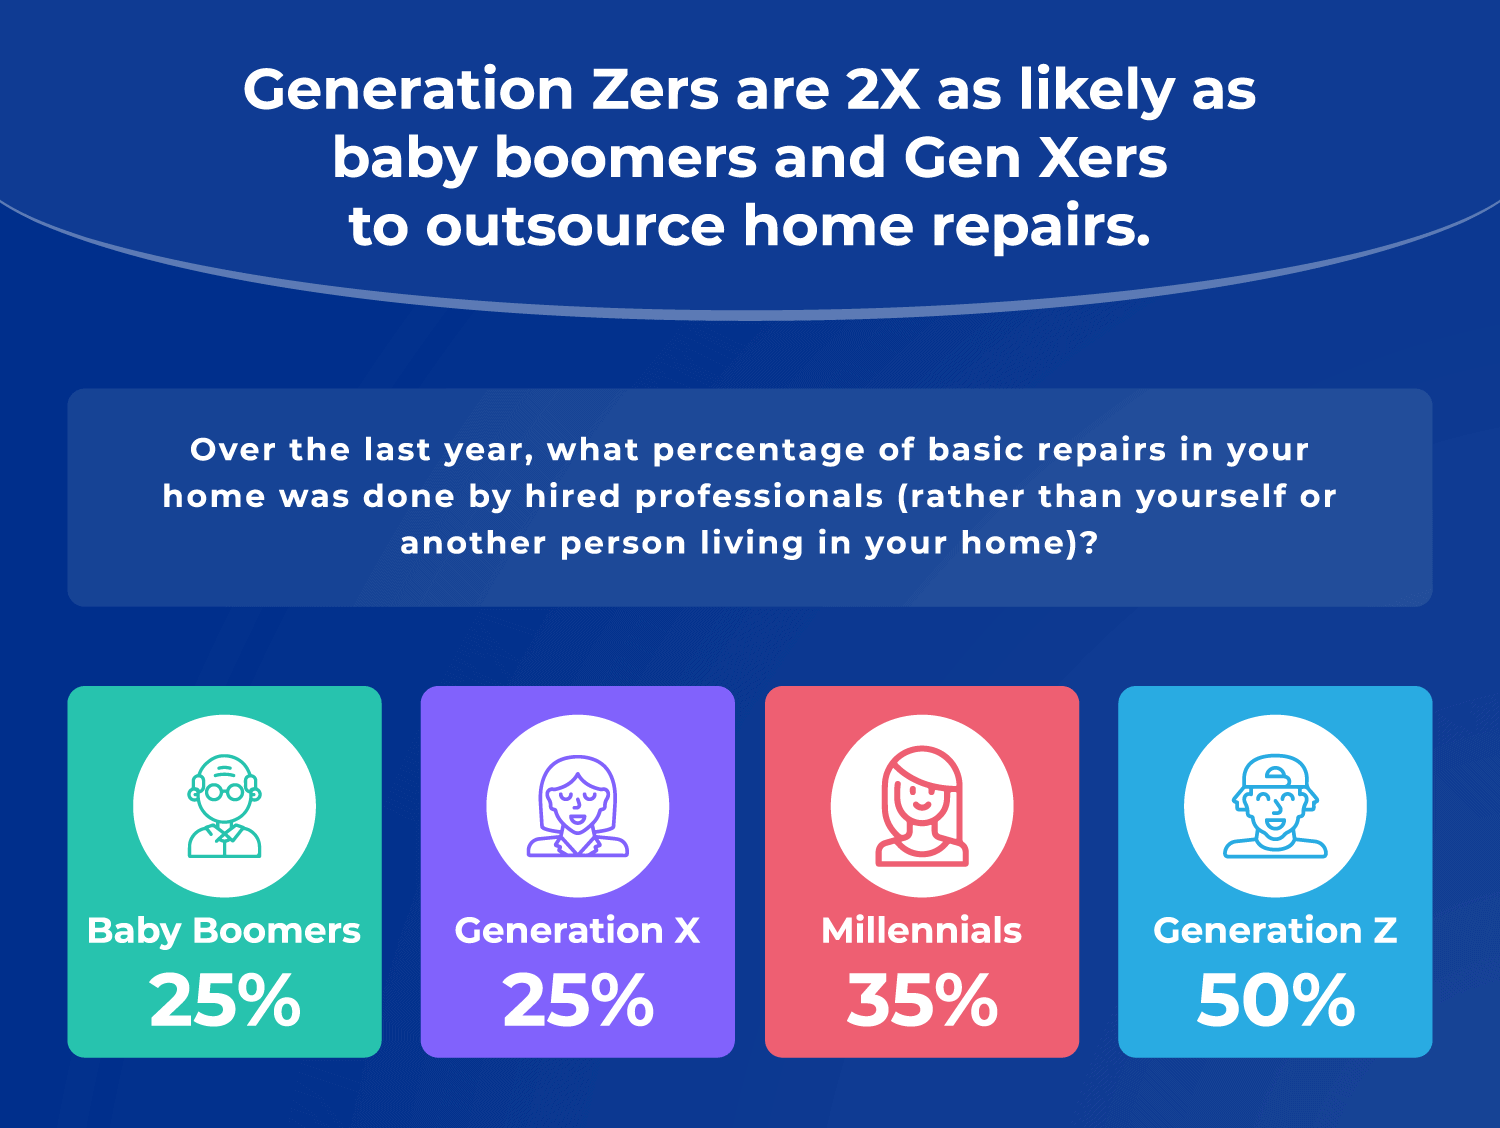 Gen Z twice as likely to outsource home repair